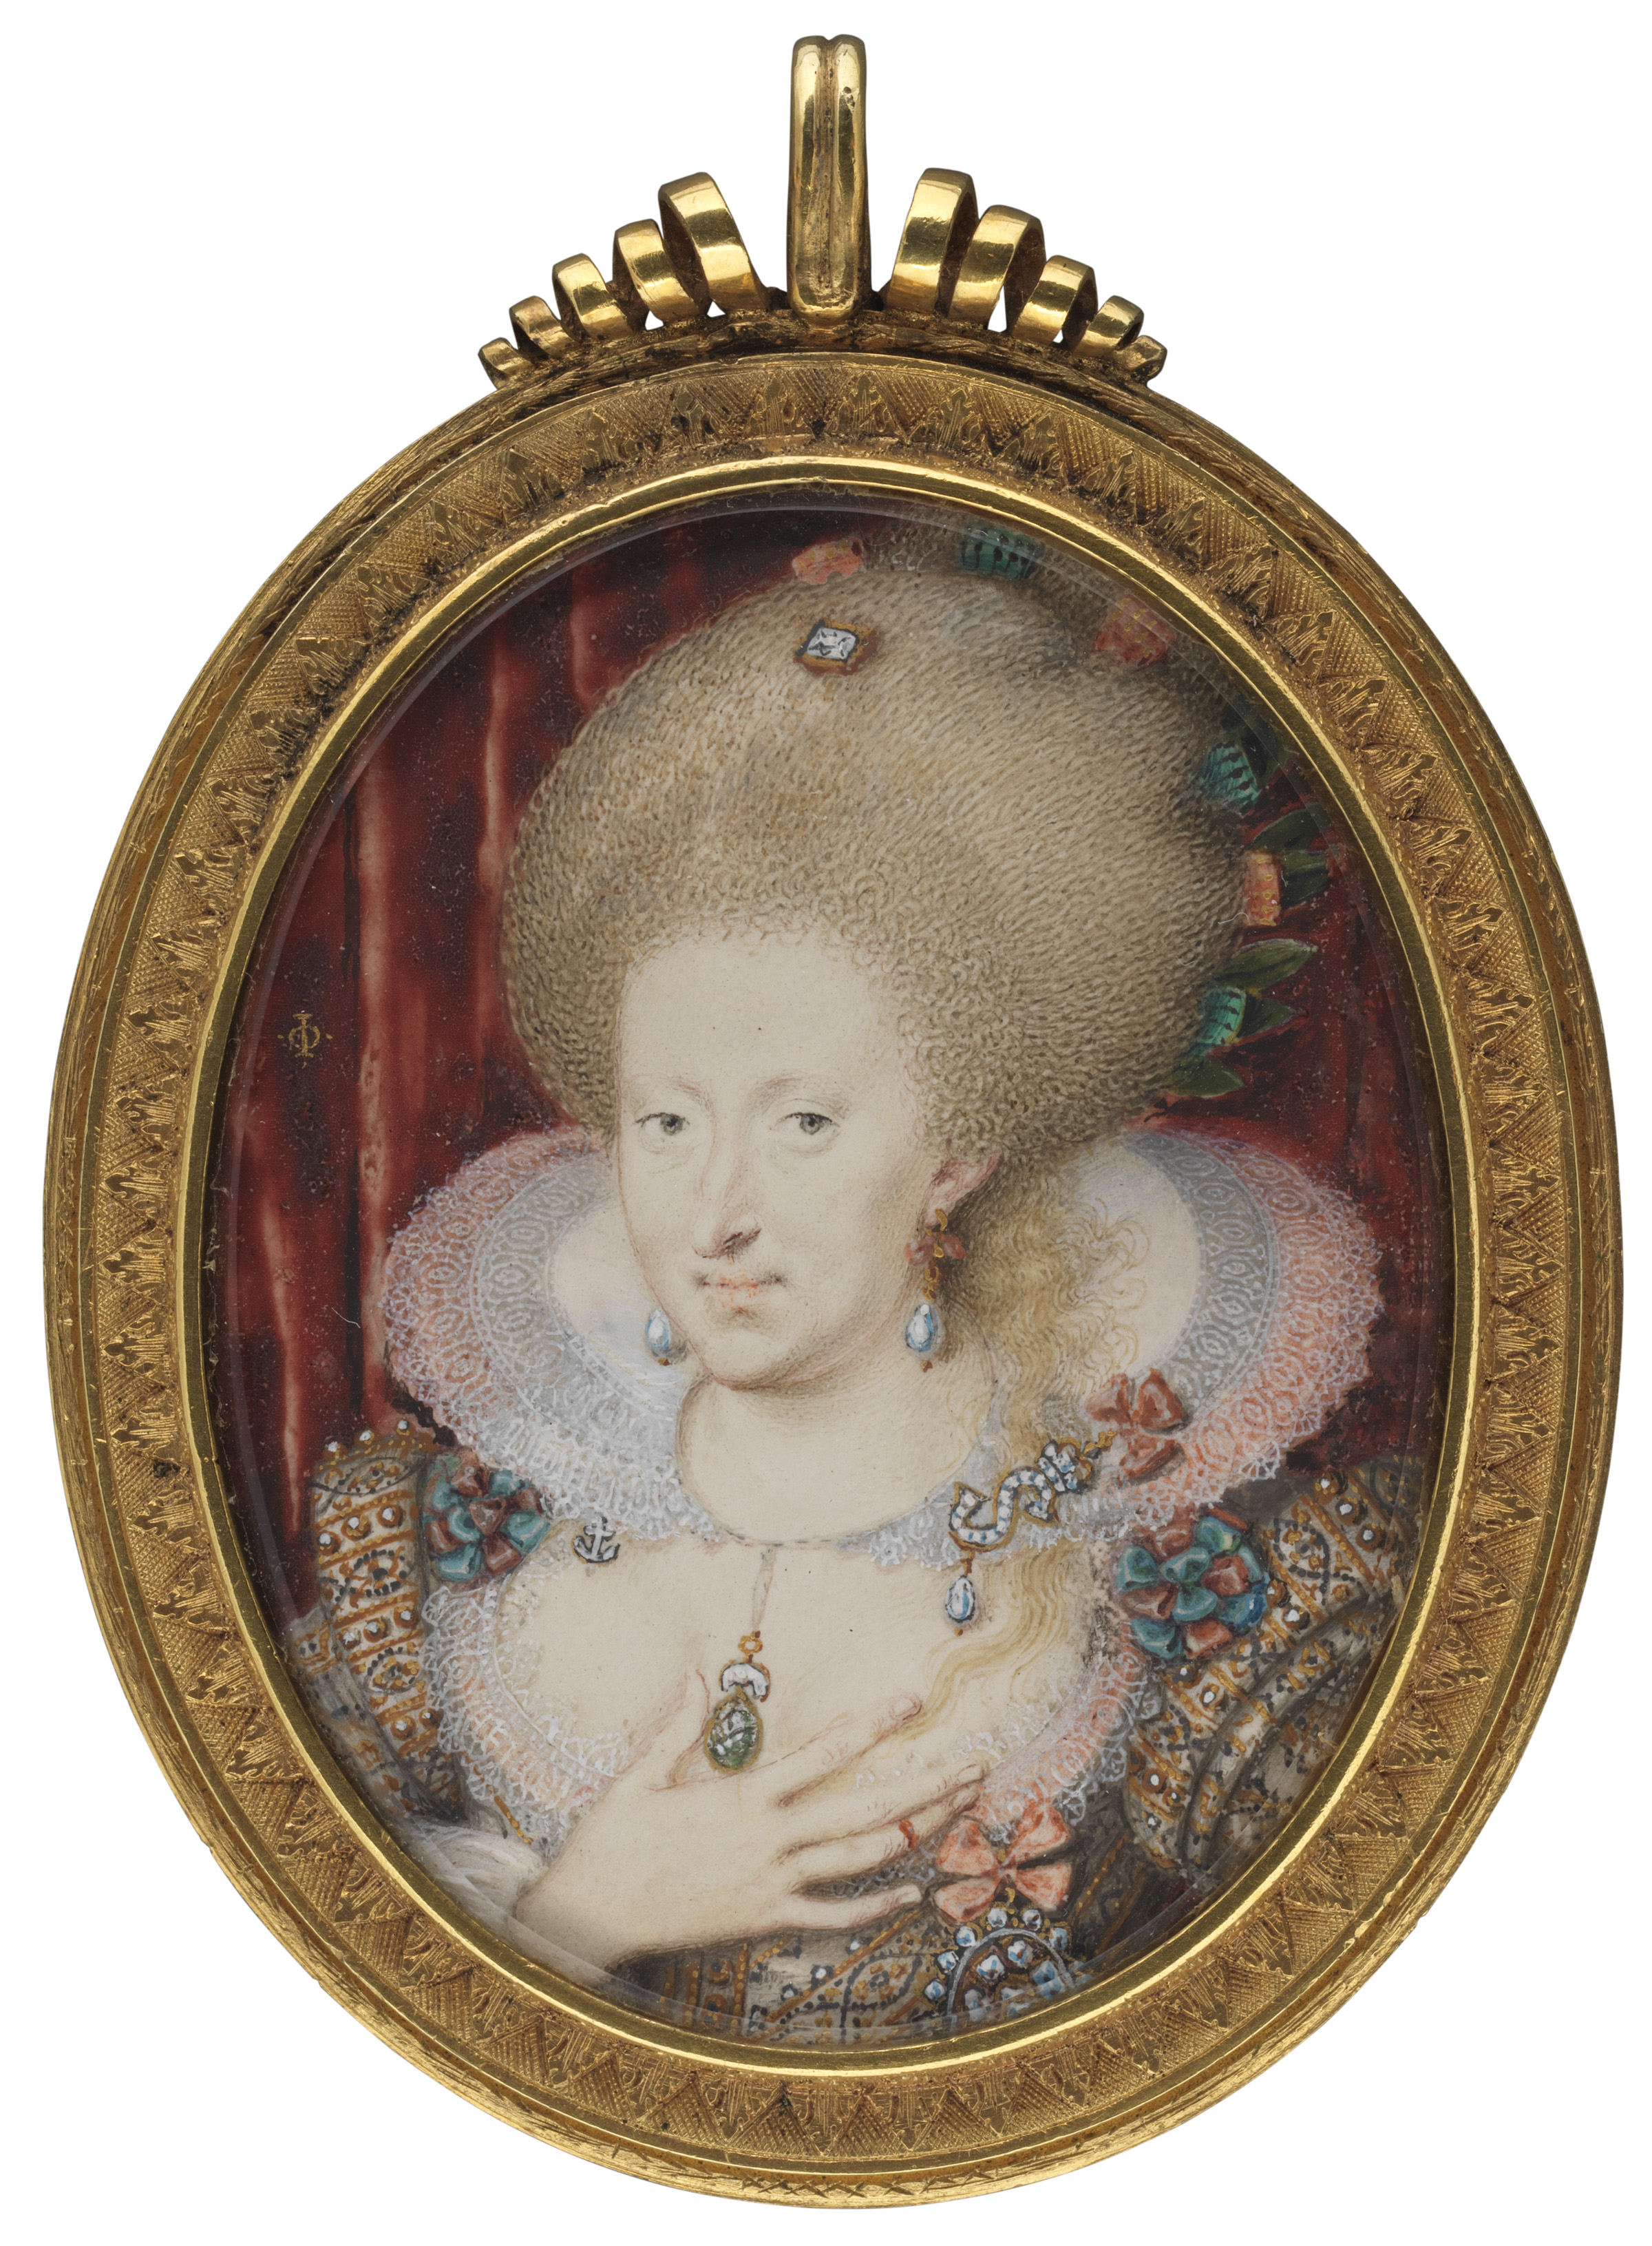 Anne of Denmark by Isaac Oliver, 1612 (National Portrait Gallery, London)